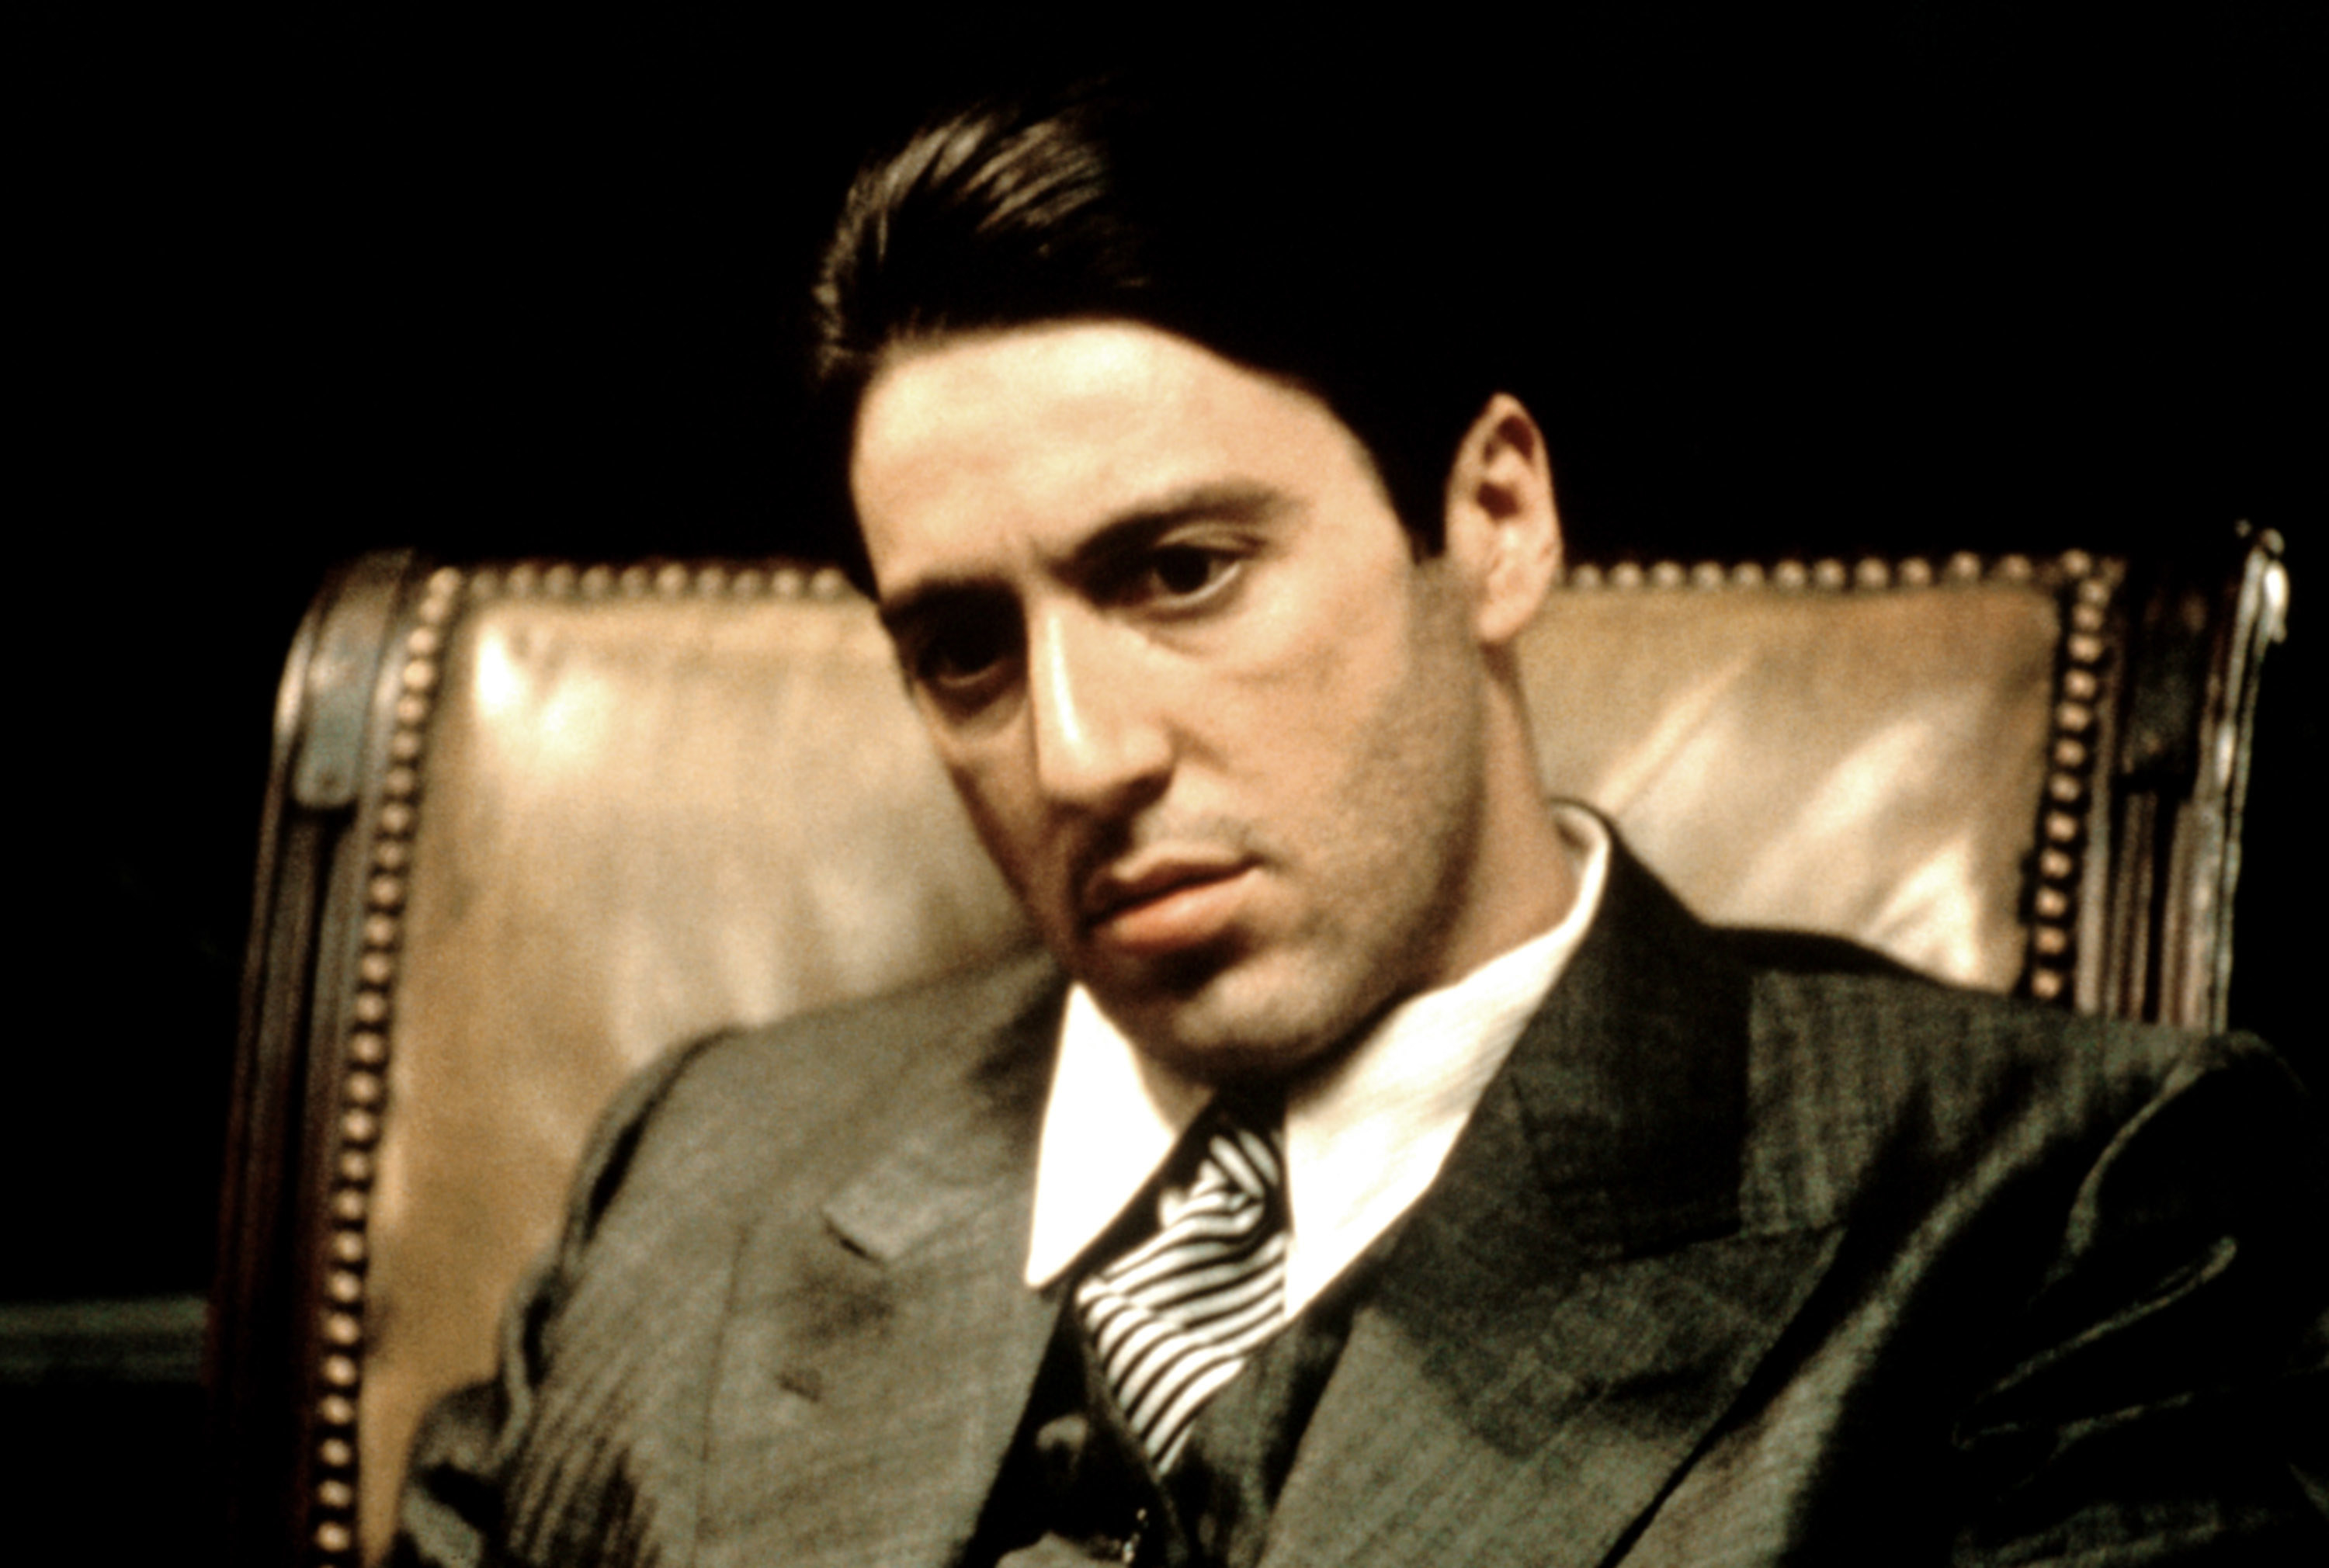 Michael Corleone sitting in a fancy office chair looking serious